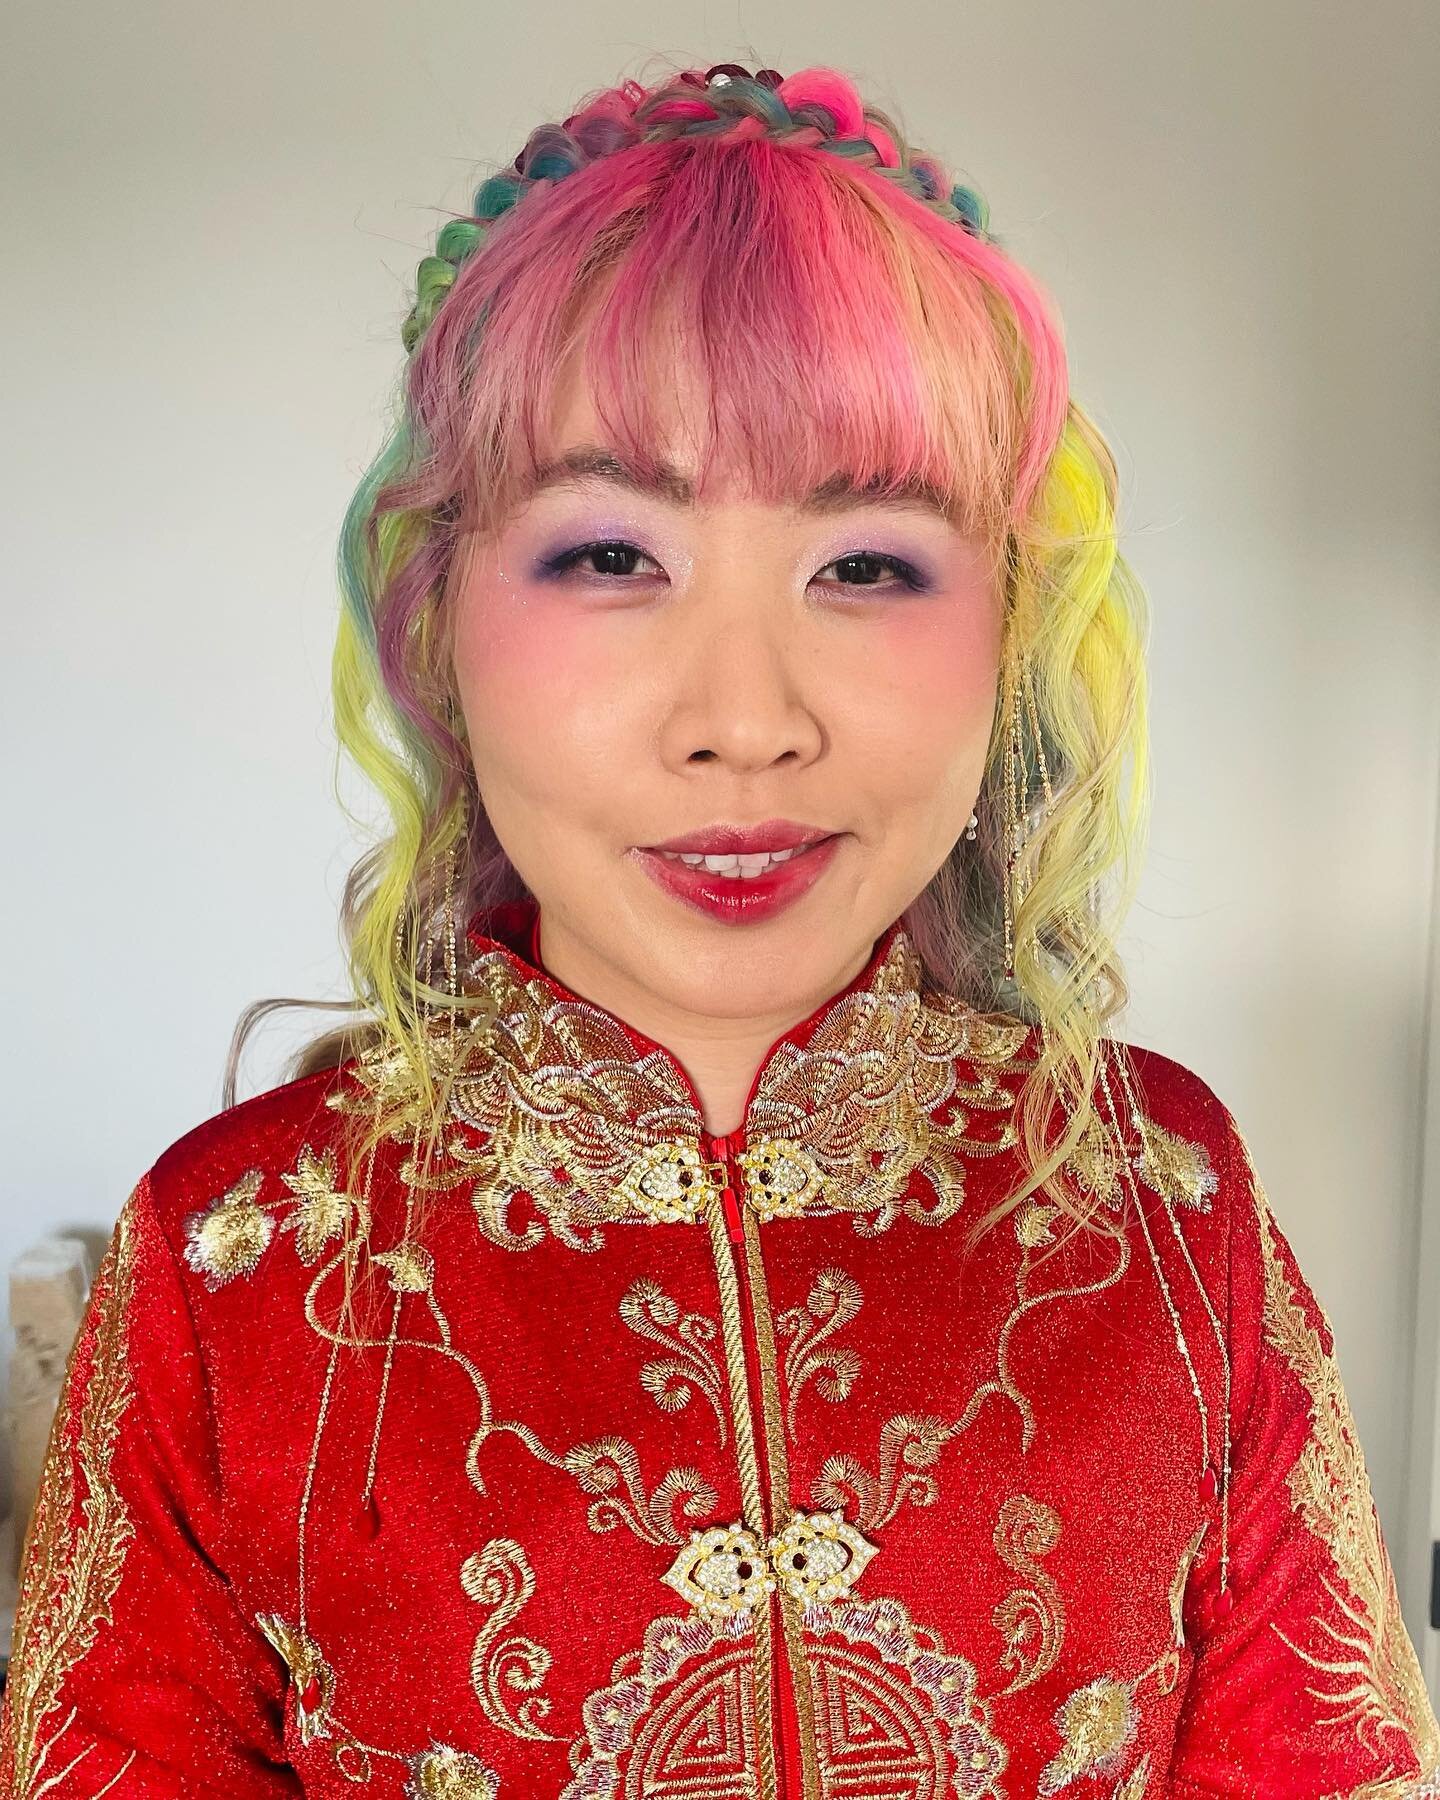 A wonderful colourful way to start my new year with Angela . #hairandmakeup #birminghamhairandmakeupartist #chinesewedding #birminghamchinesewedding #colourfulhair #colourhairbride #colour by @riibendz